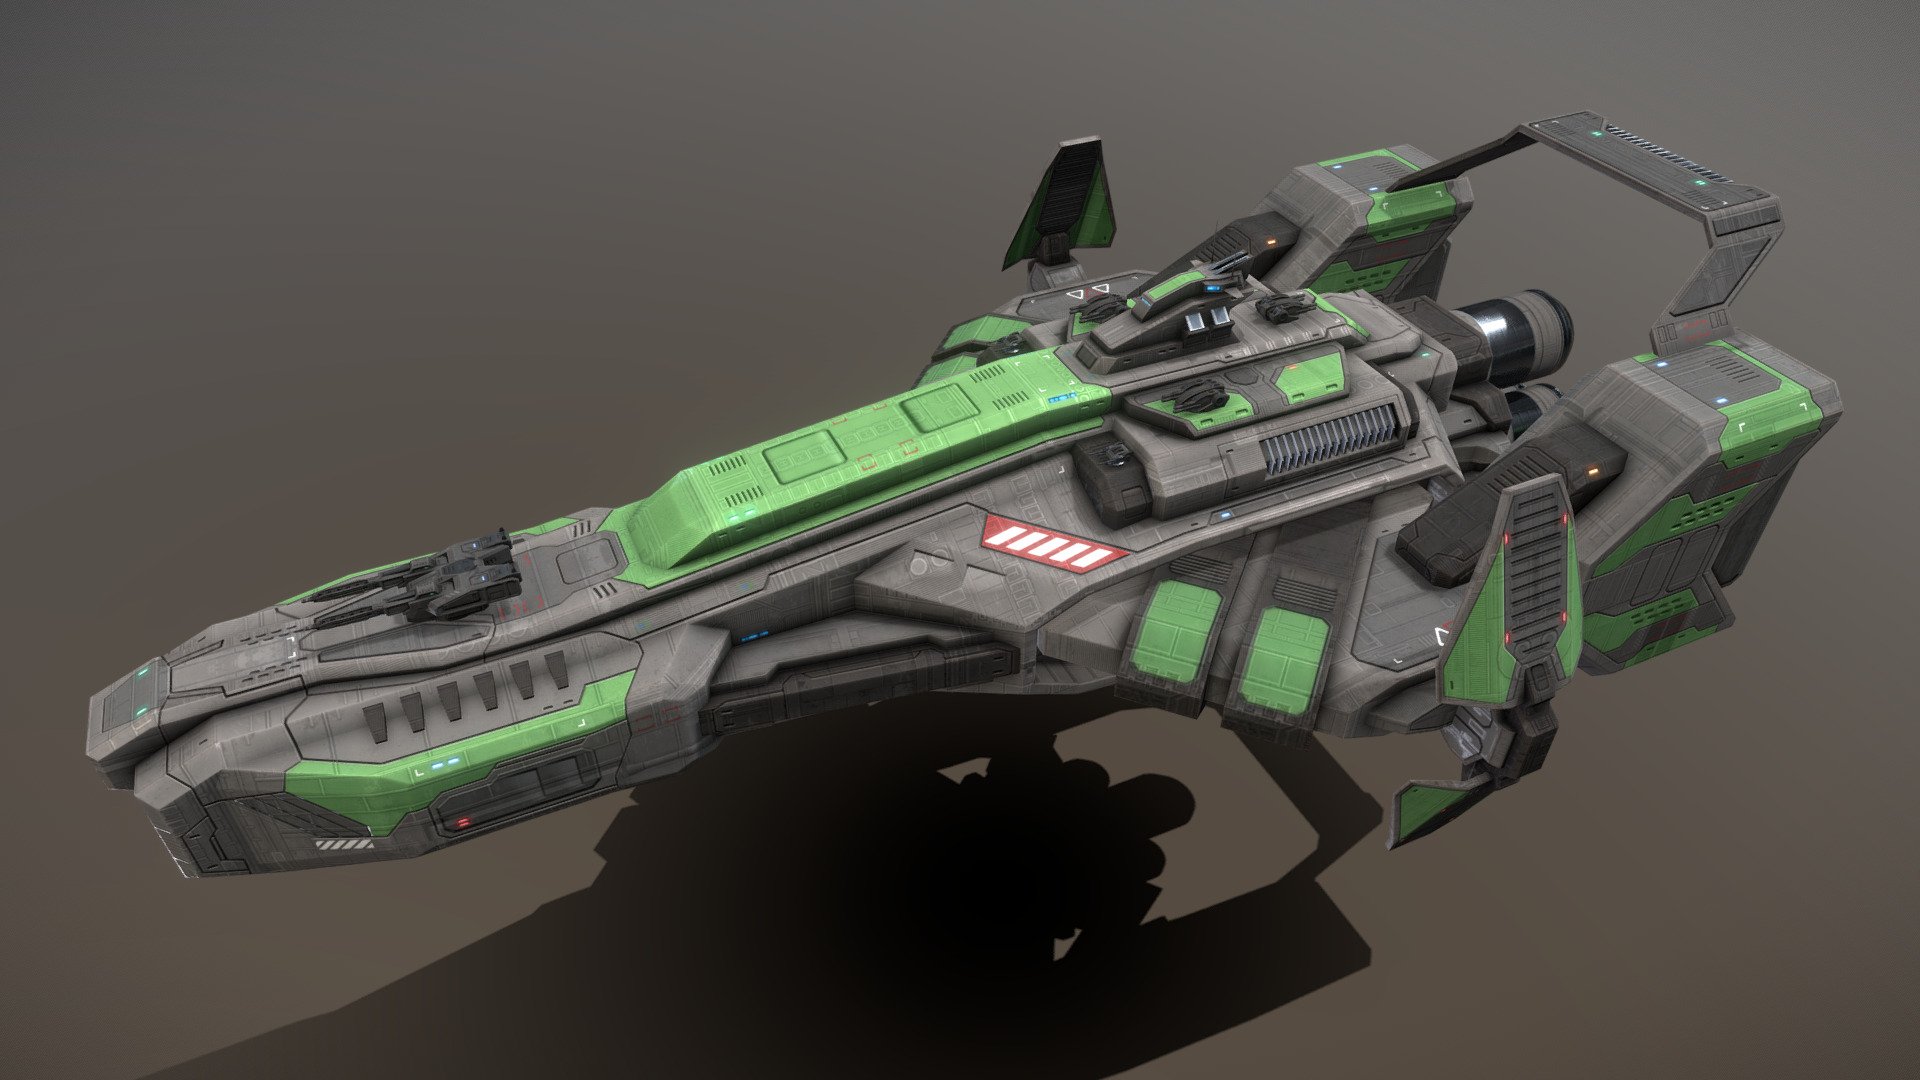 This is a model of a low-poly and game-ready scifi spaceship. 

The weapons are separate meshes and can be animated with a keyframe animation tool. The weapon loadout can be changed too. 

The model has several modular parts for bridge, engine and side modules. These parts can be changed to create different looking ships.

This model has optional maneuvering thrusters for newtonian physics based movement. They do fit on other ships too.

The model comes with several differently colored texture sets. The PSD file with intact layers is included.

Please note: The textures in the Sketchfab viewer have a reduced resolution (2K instead of 4K) to improve Sketchfab loading speed.

If you have purchased this model please make sure to download the “additional file”.  It contains FBX and OBJ meshes, full resolution textures and the source PSDs with intact layers. The meshes are separate and can be animated (e.g. firing animations for gun barrels, rotating turrets, etc) 3d model